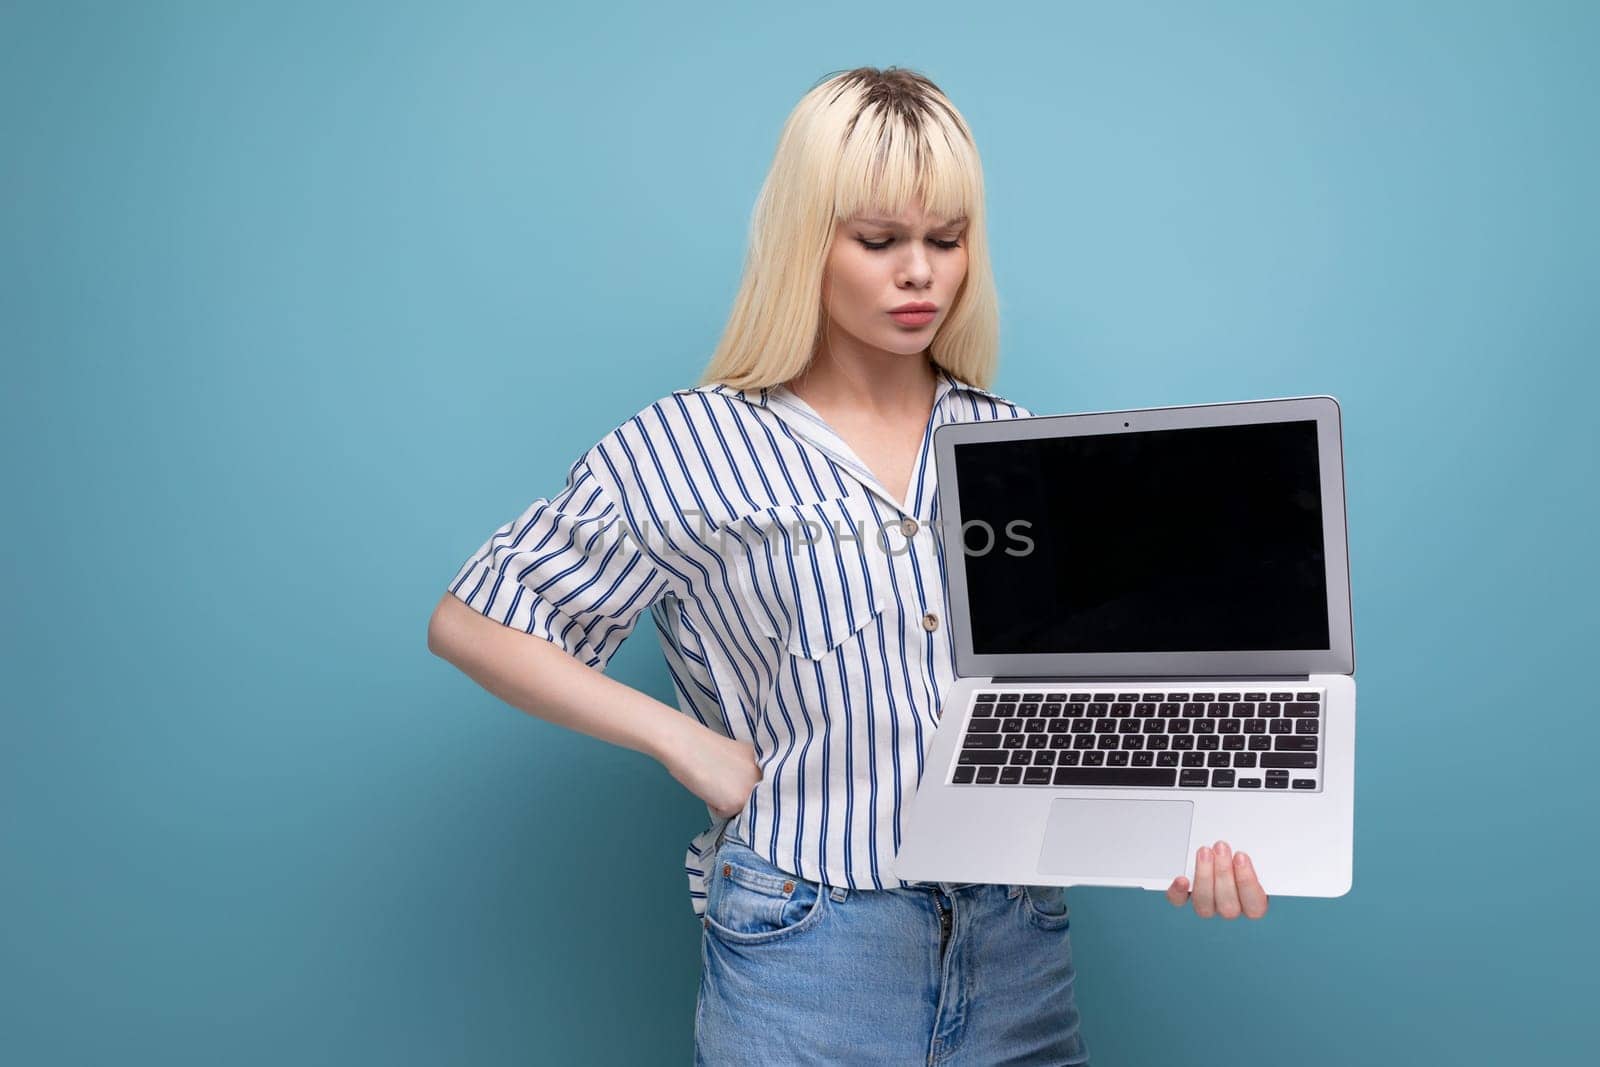 successful freelance blond young woman in striped shirt showing advertisement on laptop in studio background.